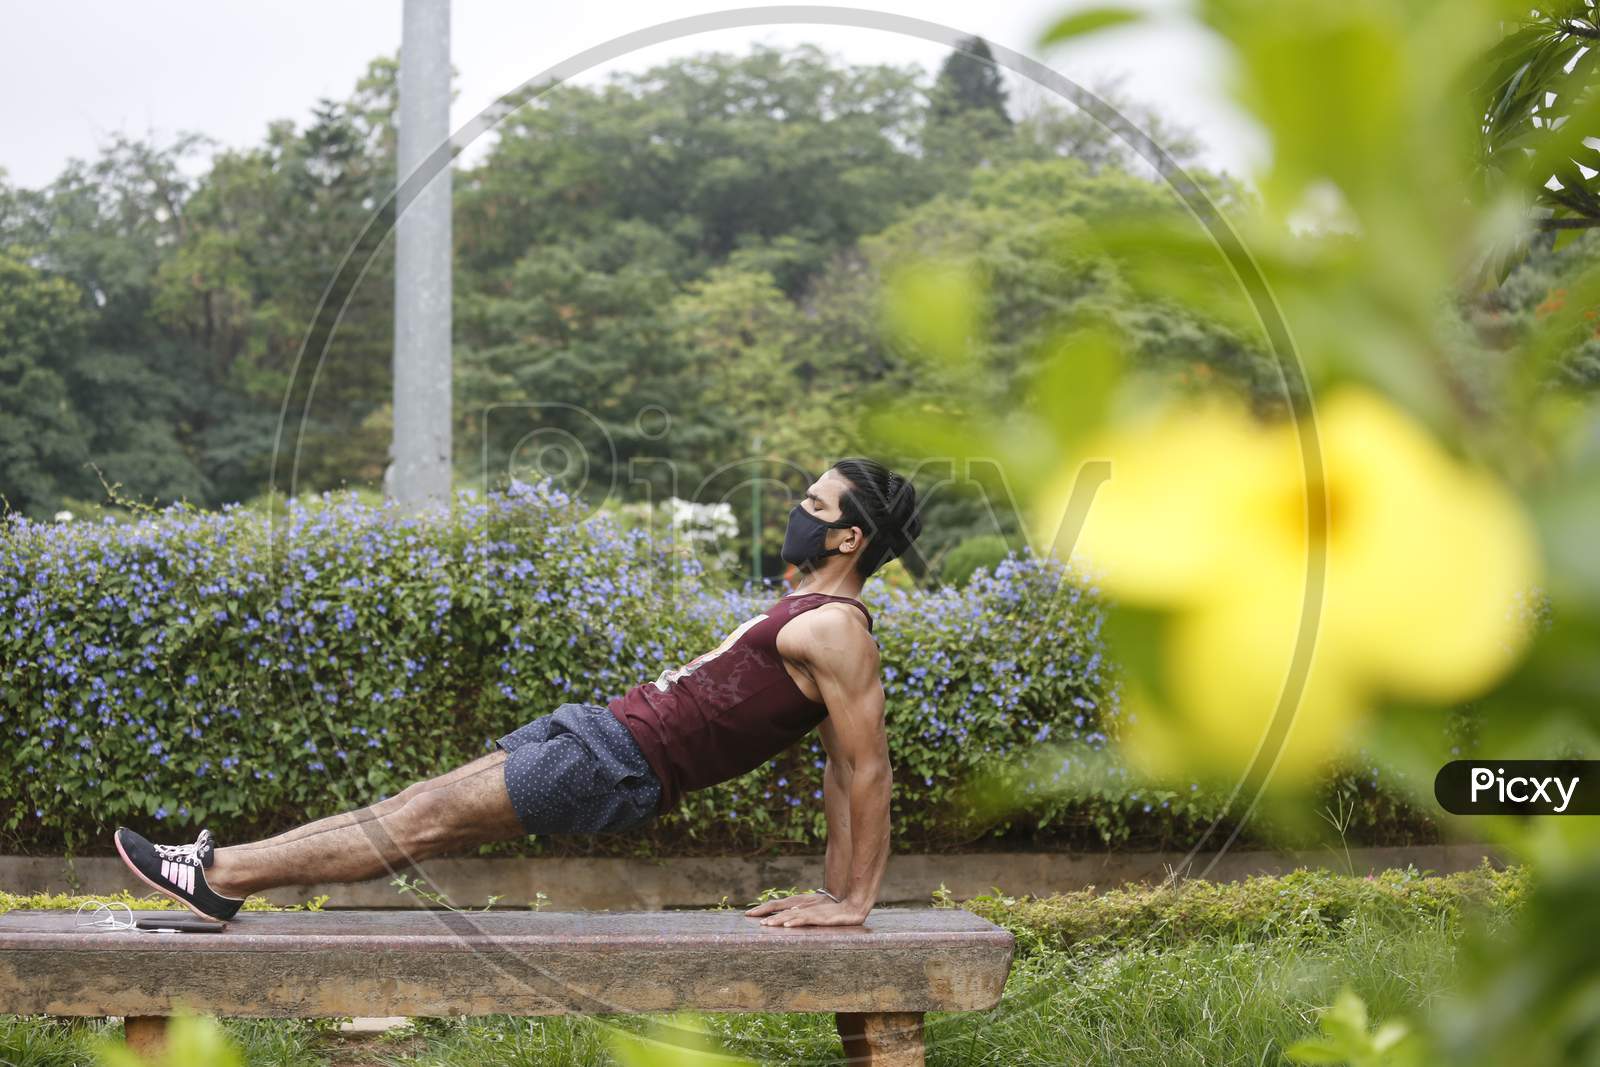 A man exercises on a park bench in Cubbon Park after the state eased lockdown norms during the nationwide lockdown to prevent the spread of coronavirus (COVID-19) in Bangalore, India.